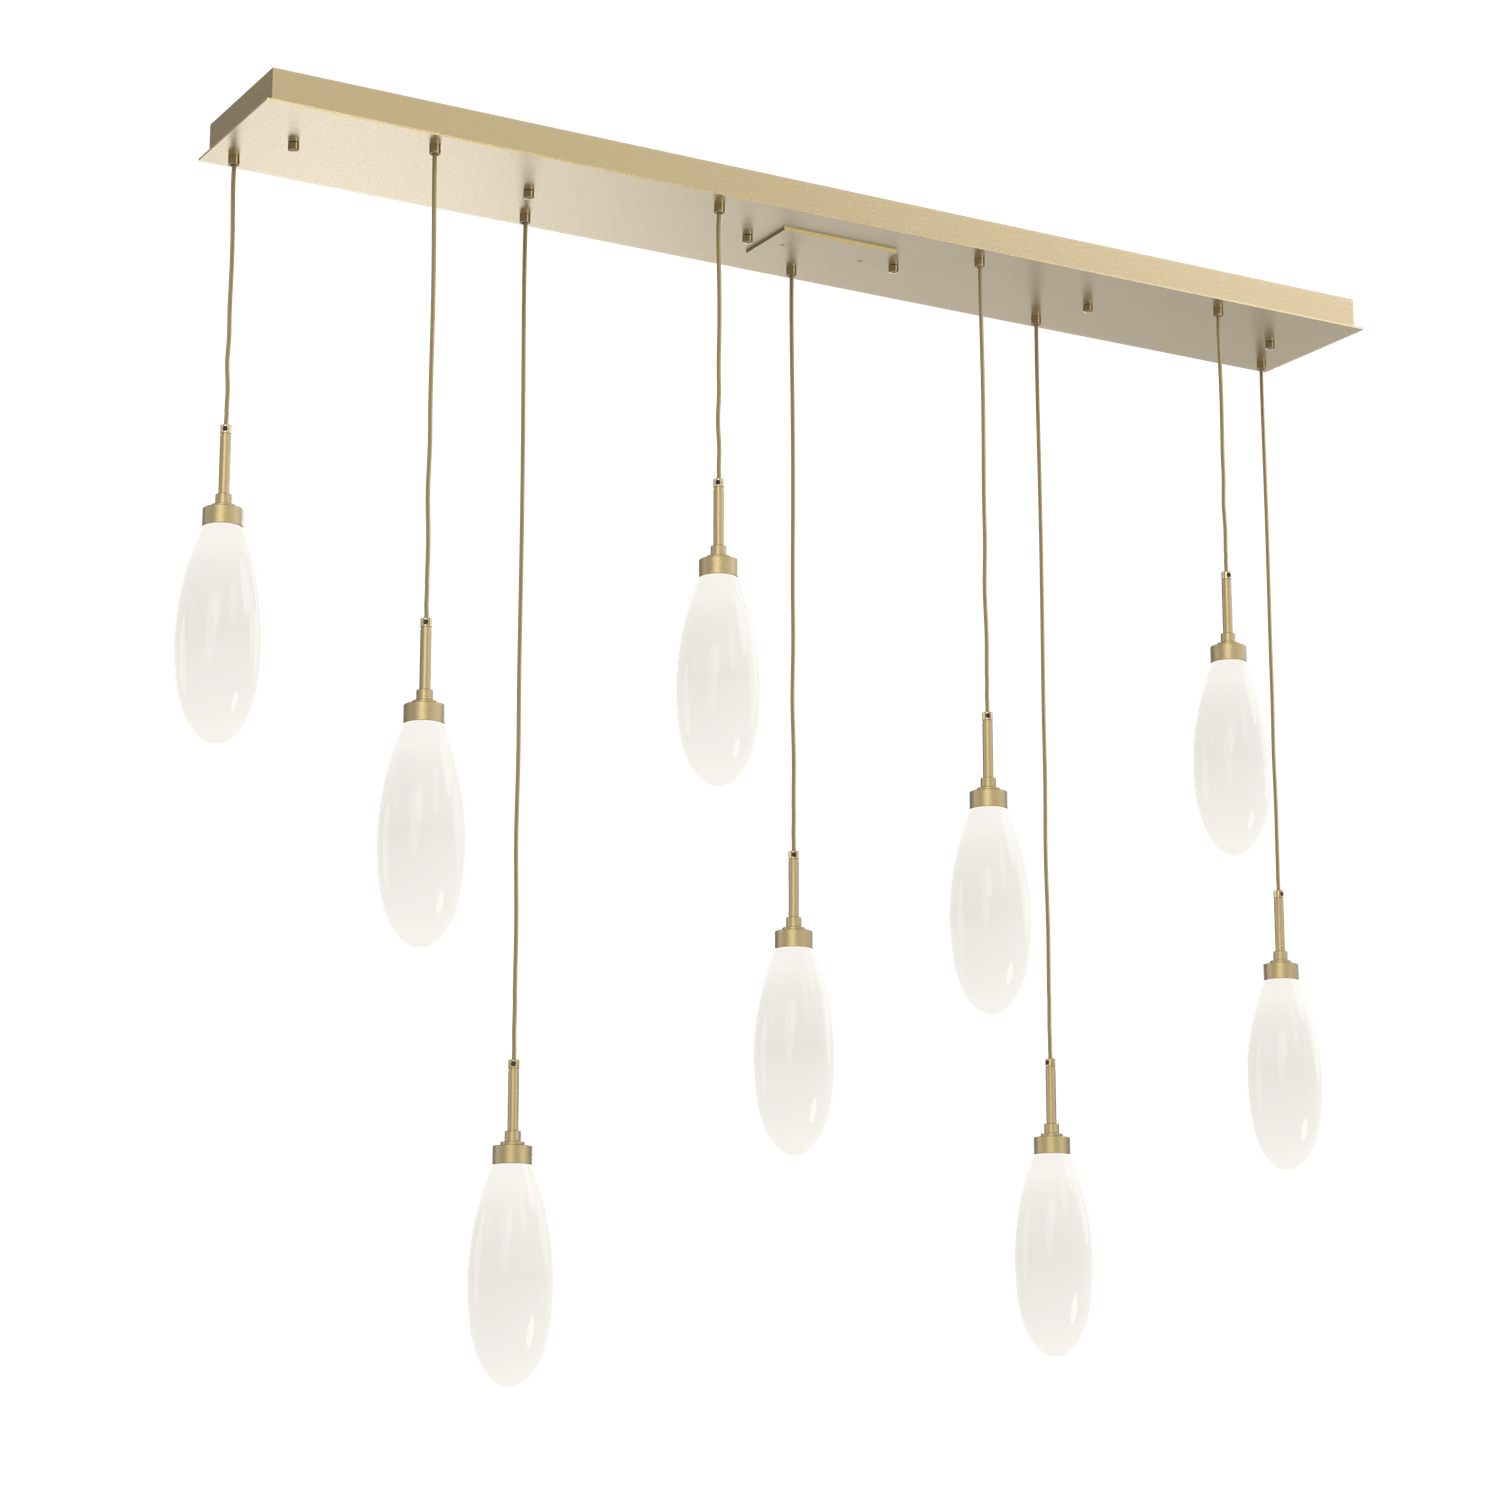 PLB0071-09-GB-WL-LL-Hammerton-Studio-Fiori-9-light-linear-pendant-chandelier-with-gilded-brass-finish-and-opal-white-glass-shades-and-LED-lamping